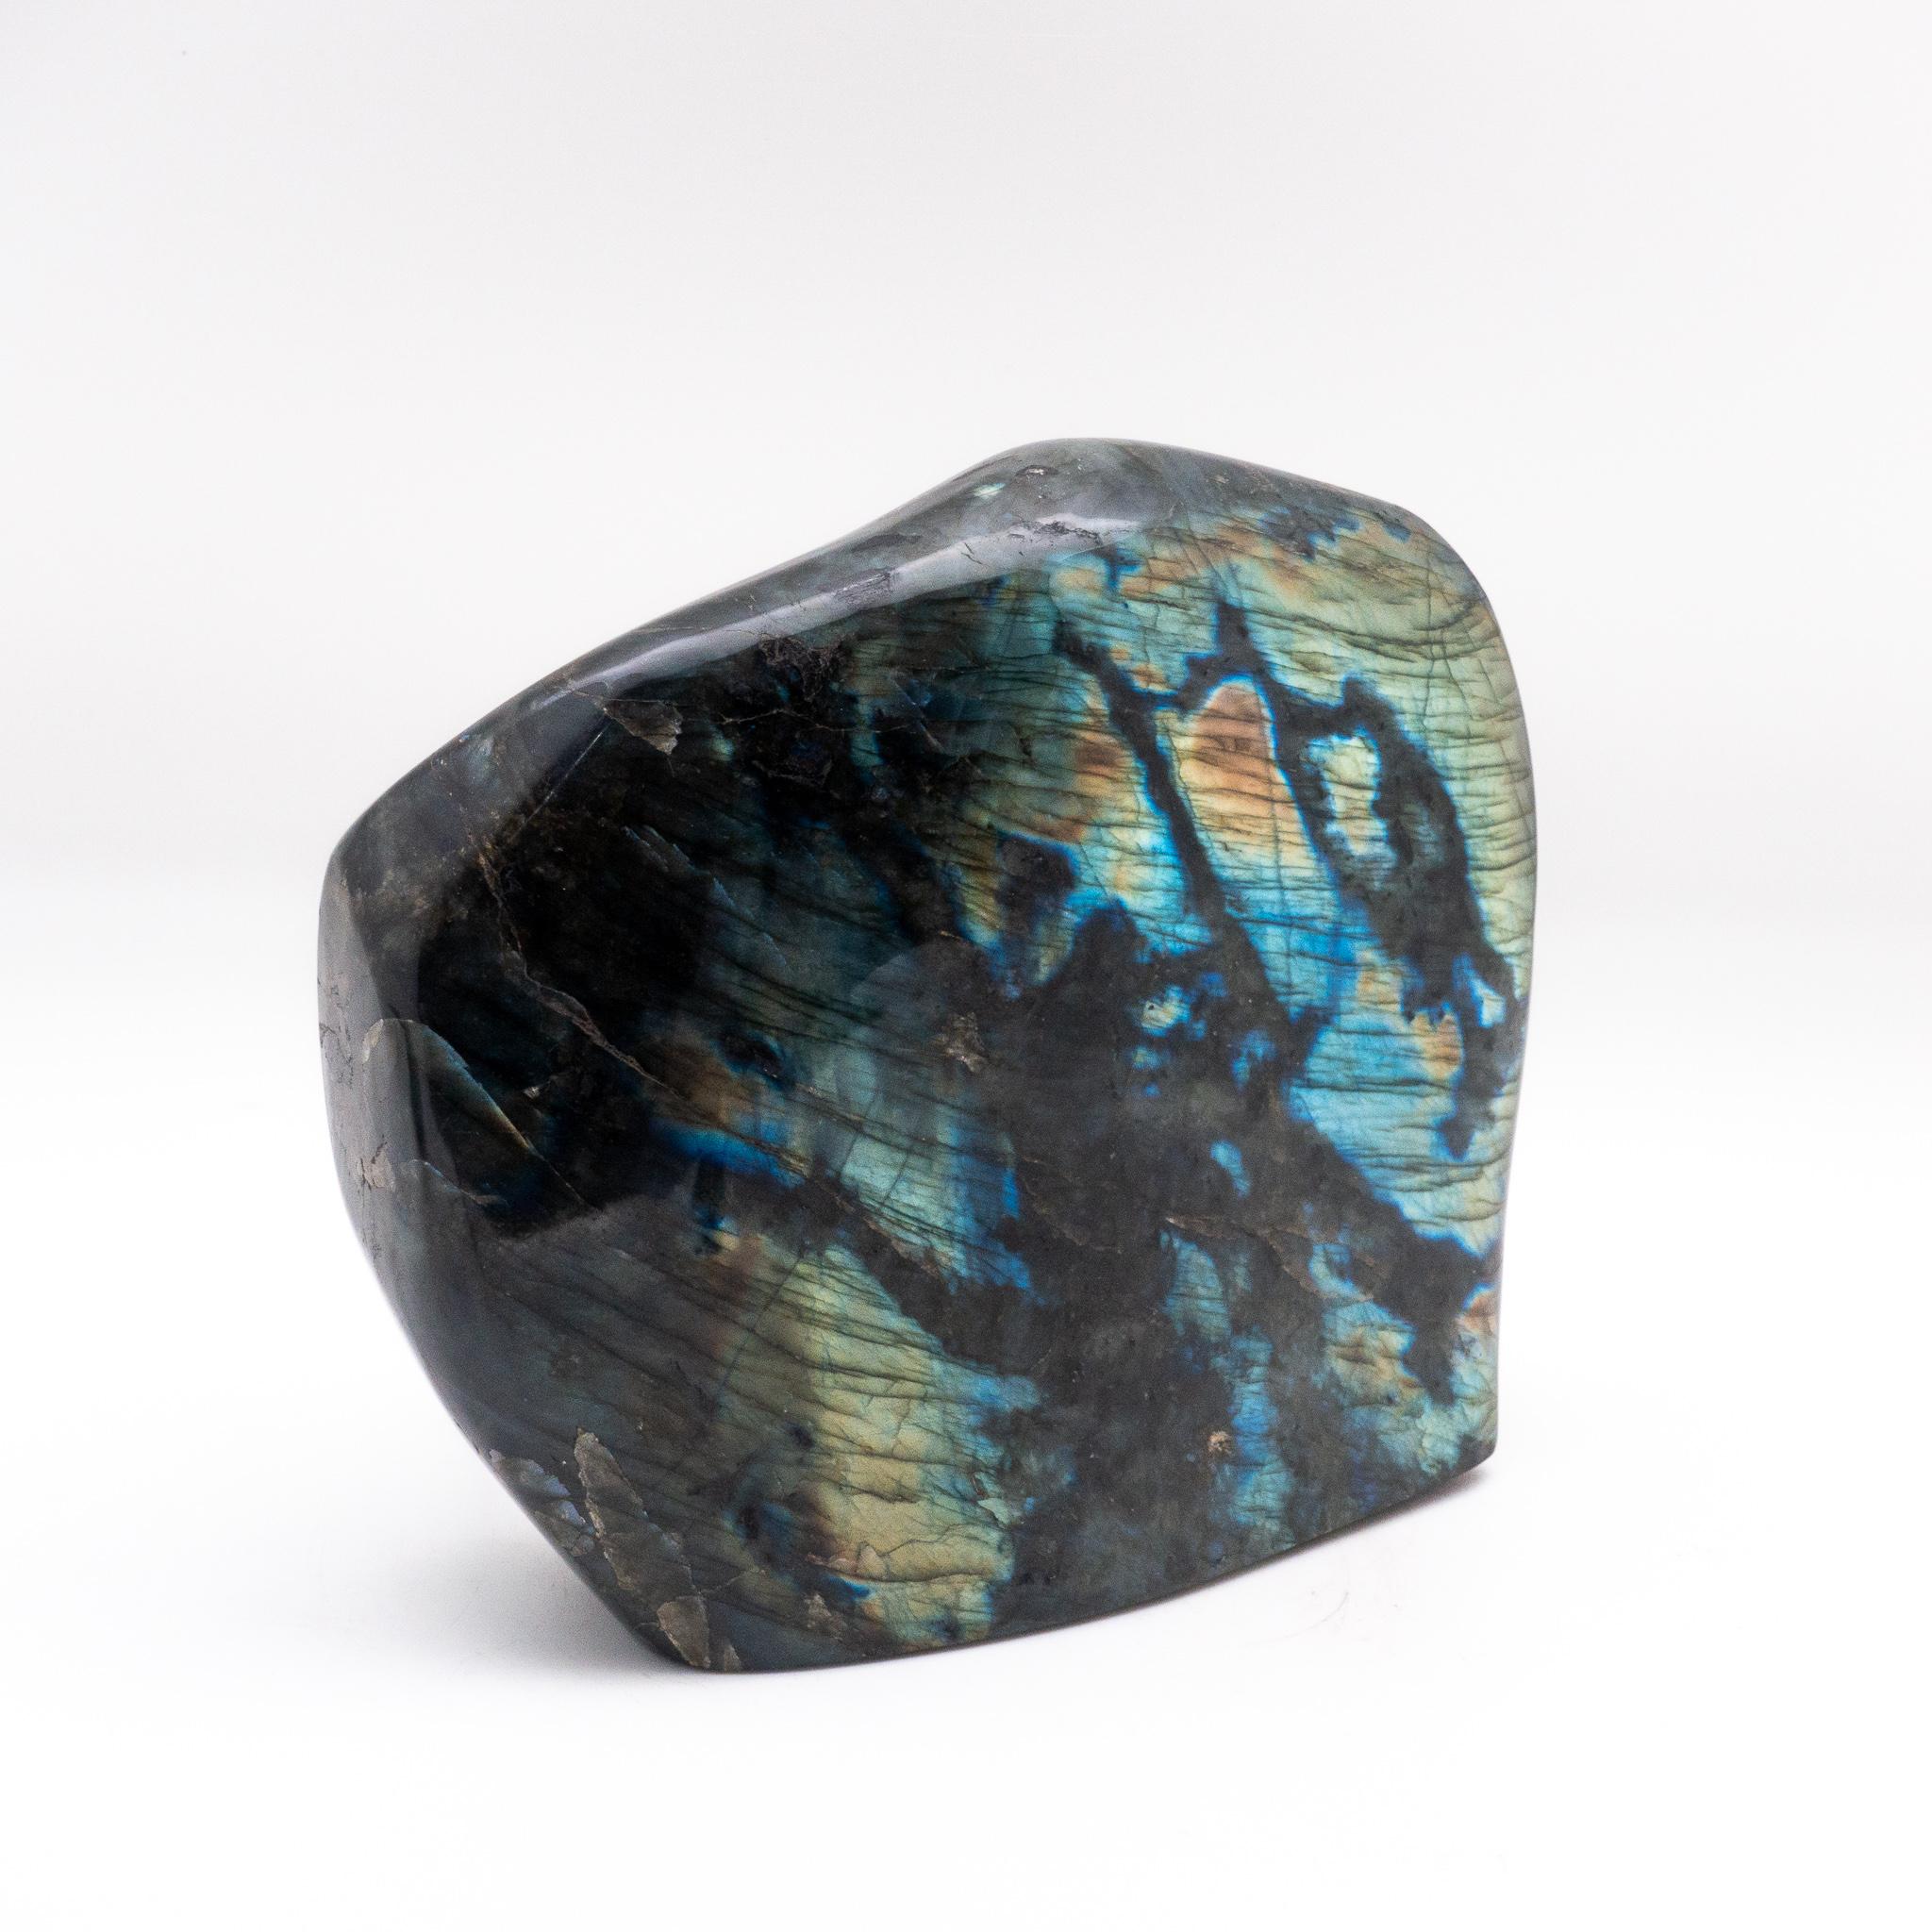 Large polished labradorite specimen. Labradorite displays an iridescent optical effect (or schiller) known as labradorescence. Labradorite is also know as stone that will help you become the person that you are destined to be. It will cleanse your